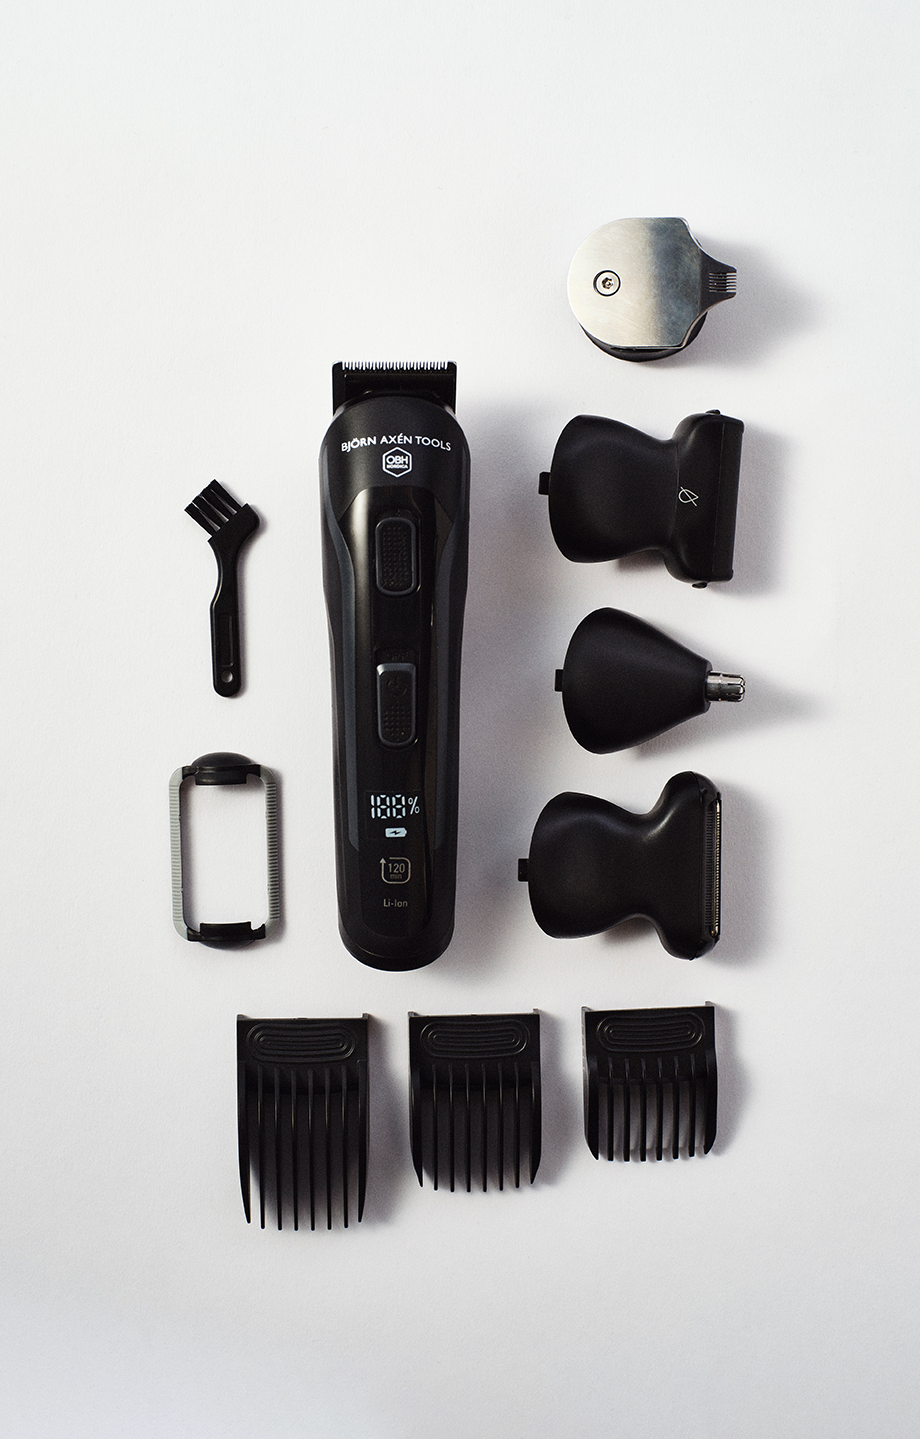 The ultimate groomer for hair, beard, face and body